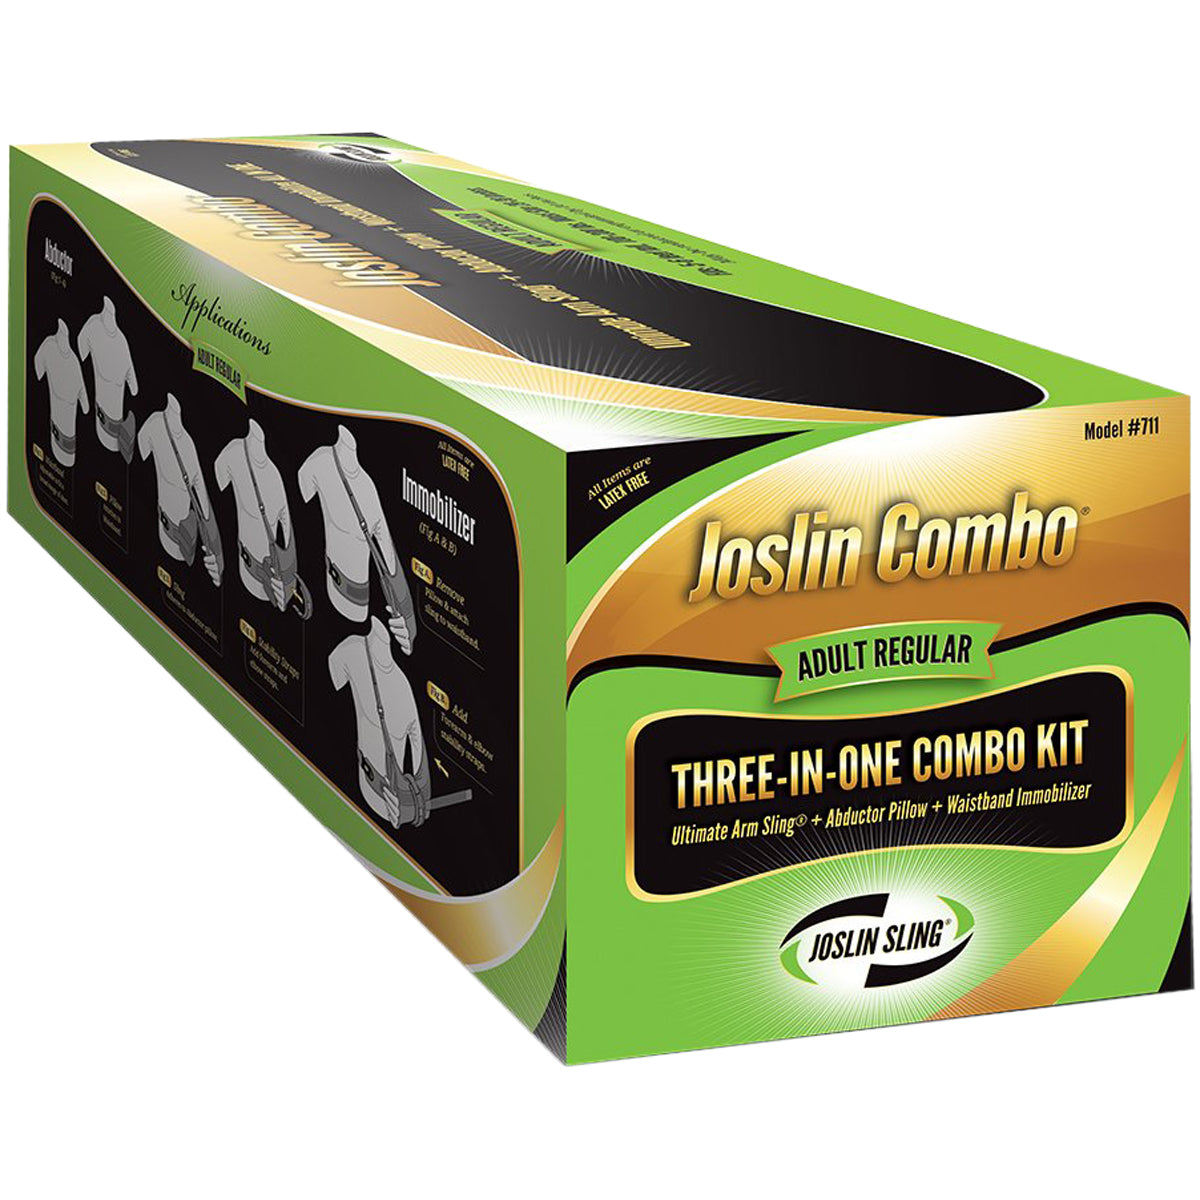 Joslin Combo Kit, Includes: Ultimate Arm Sling, Immobilizer, and Abductor Pillow Joslin